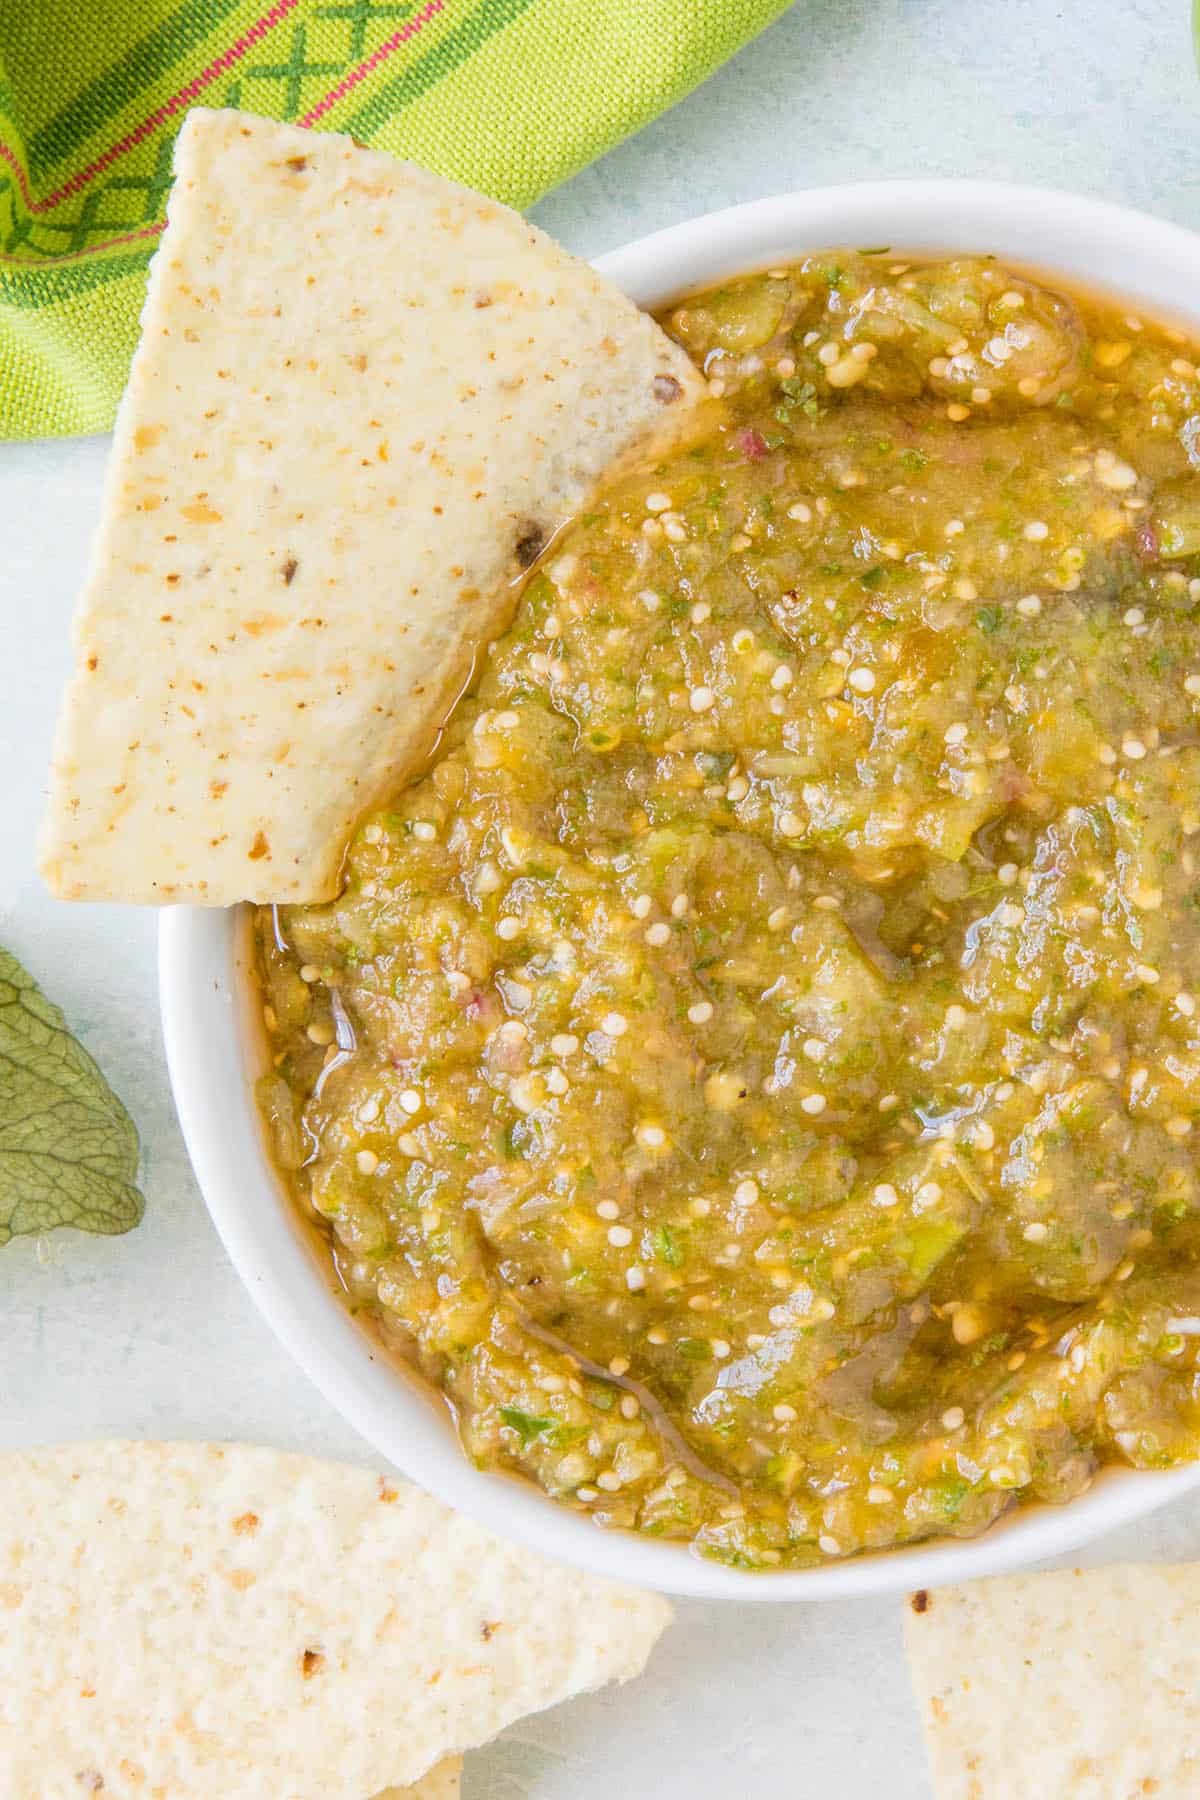 Salsa verde in a bowl, ready to eat